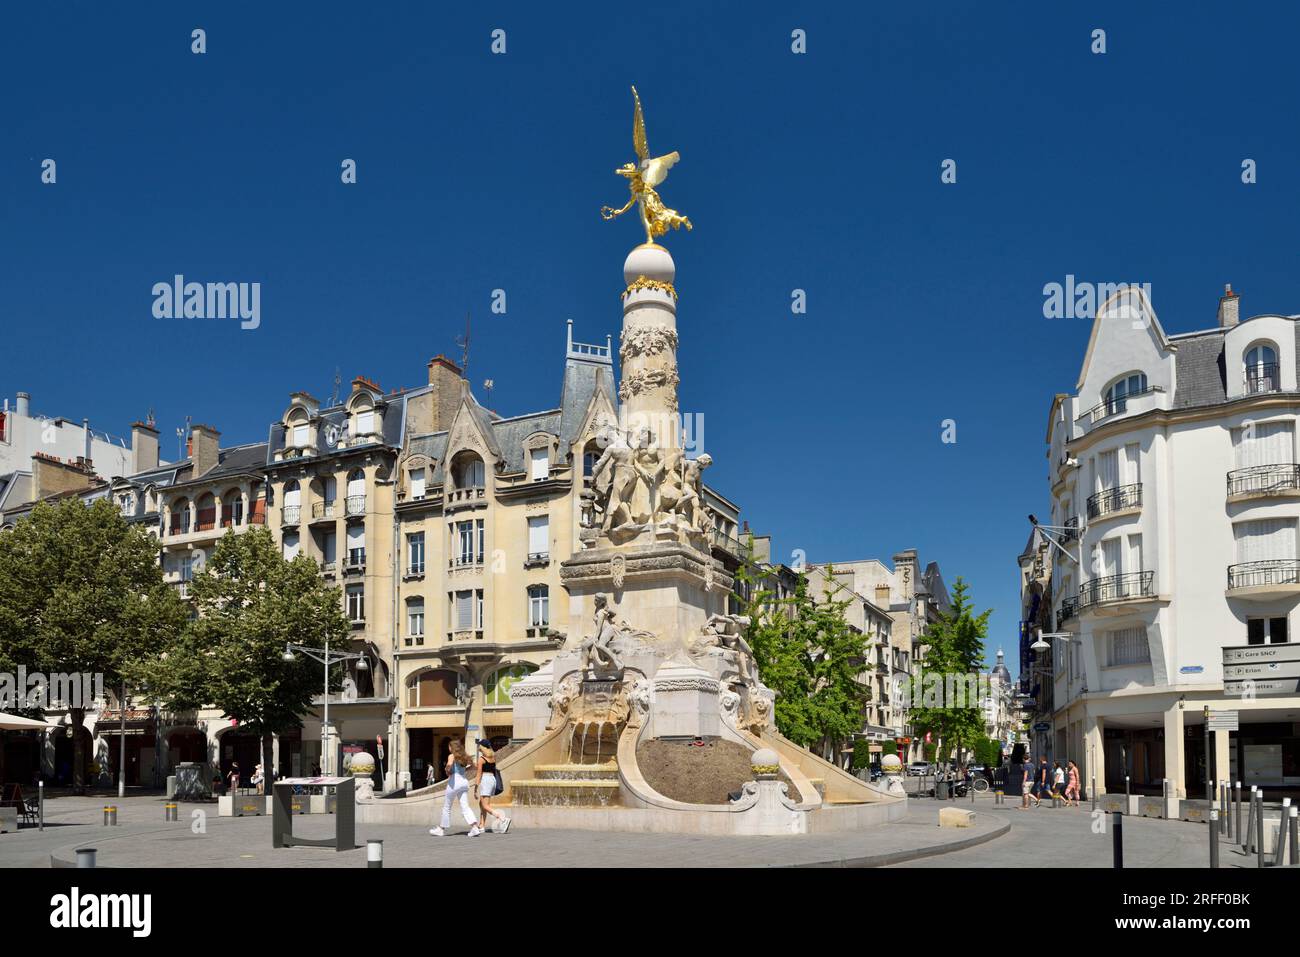 France, Marne, Reims, place Drouet d'Erlon, Sube fountain dating from 1906 Stock Photo